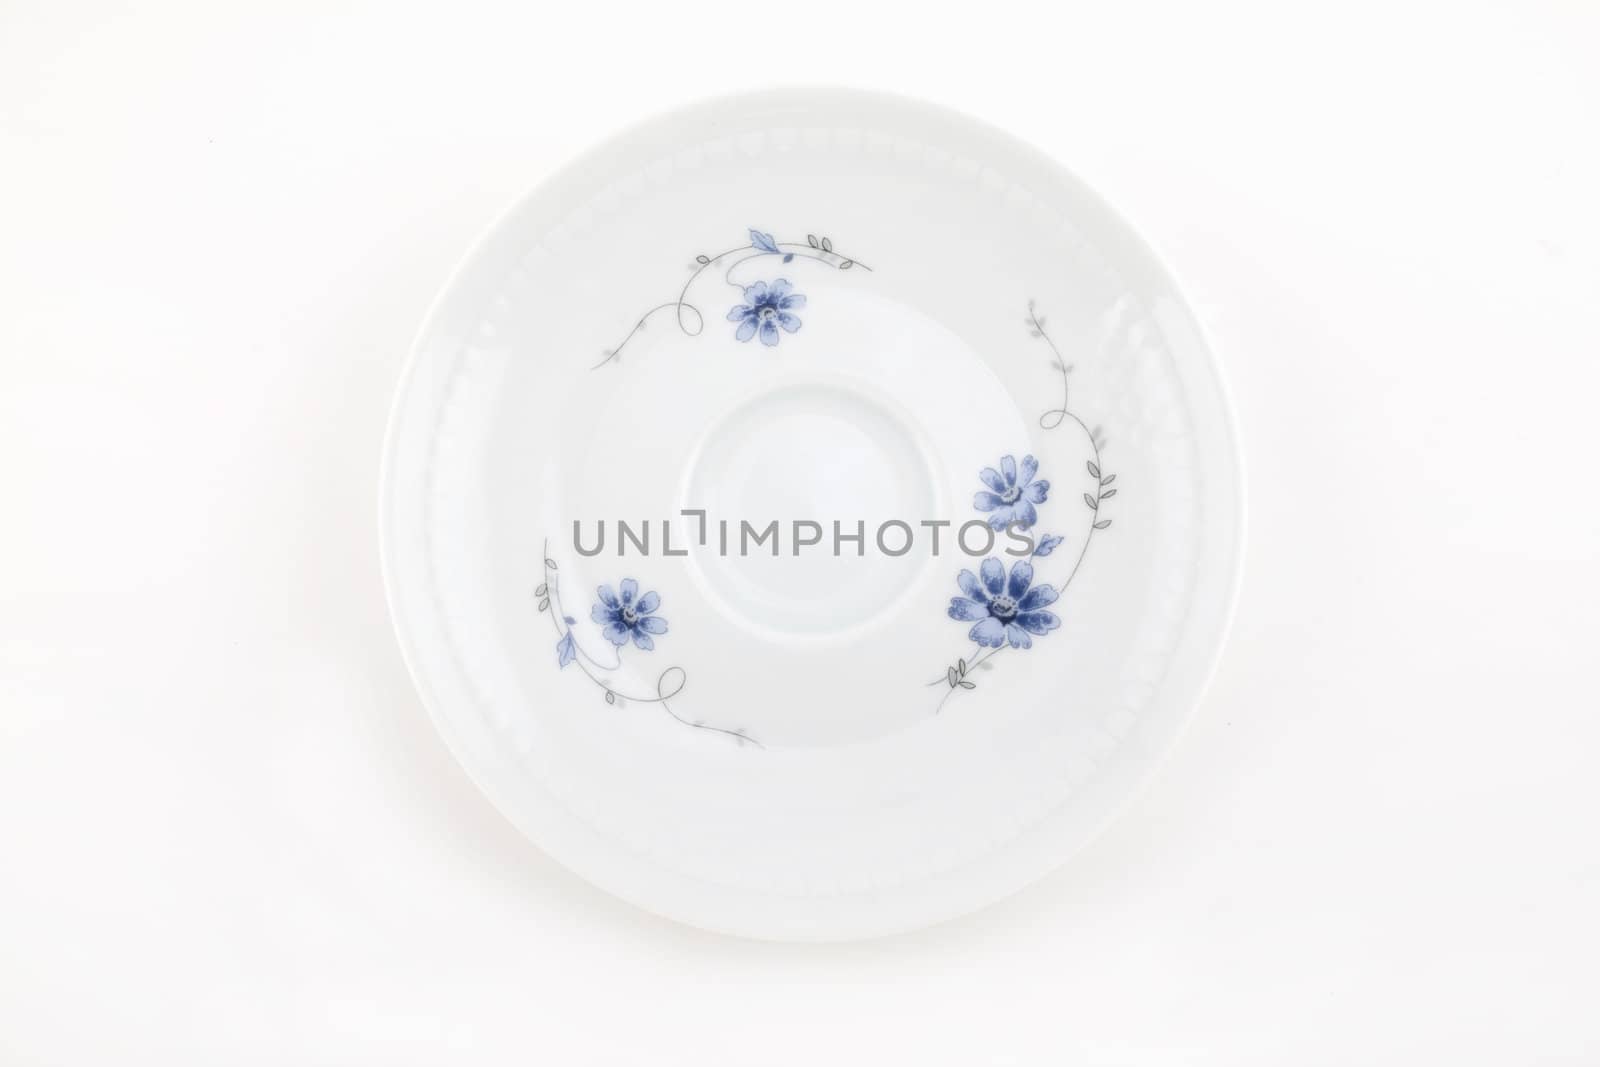 Ornamented plate on white isolated for site